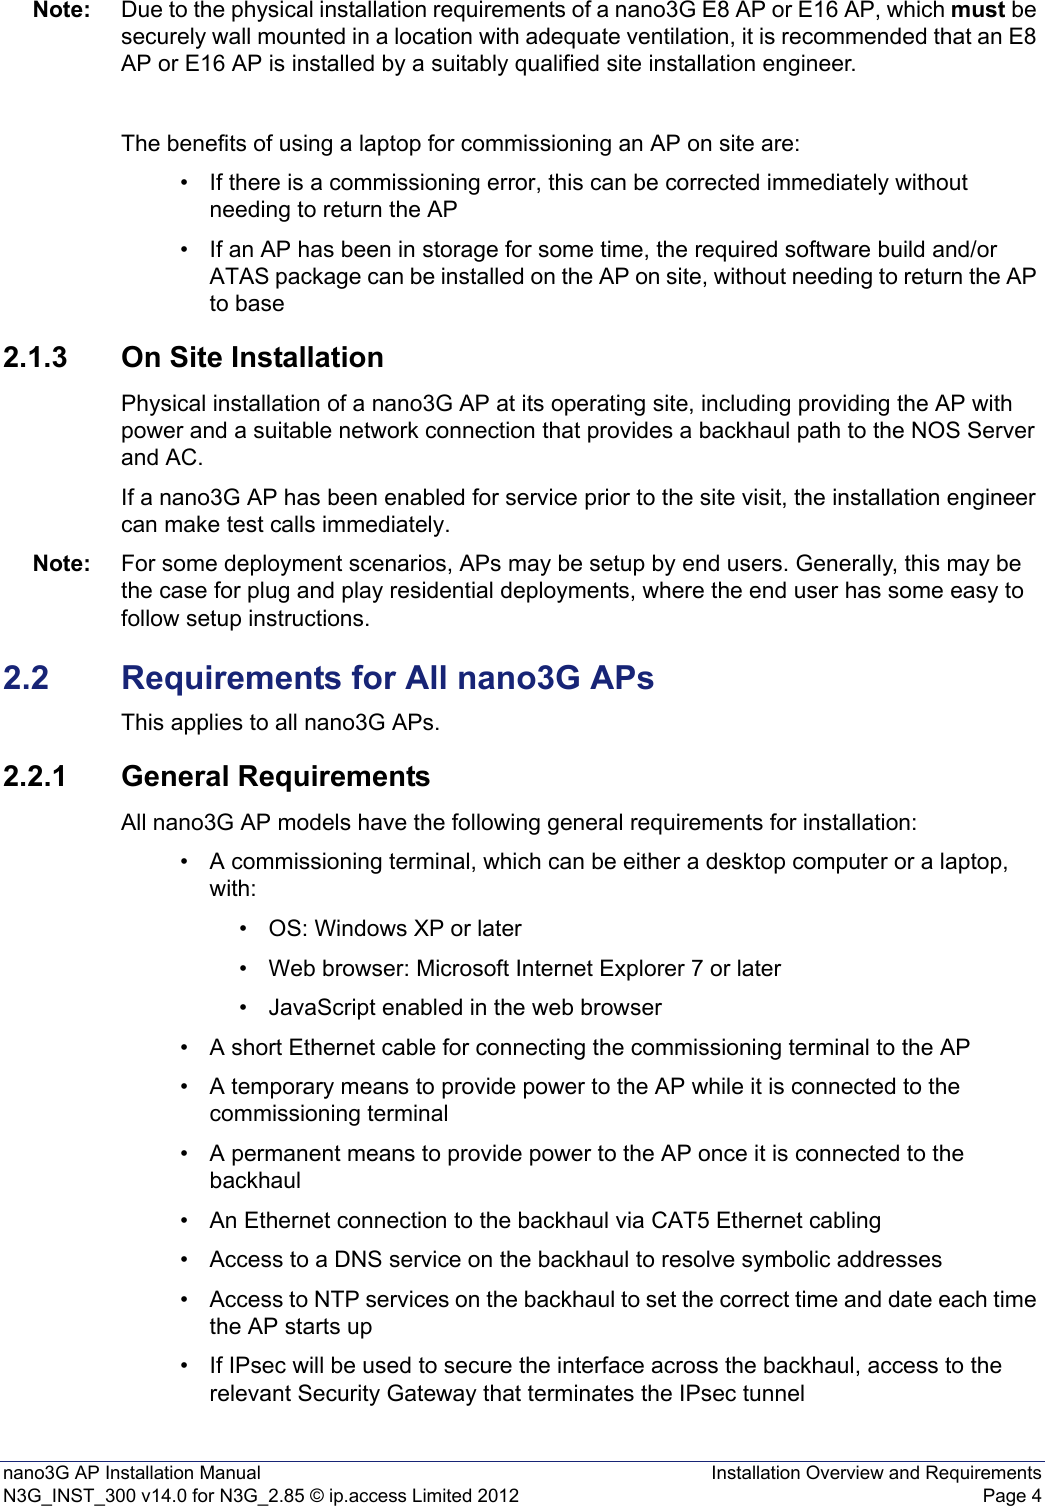 nano3G AP Installation Manual Installation Overview and RequirementsN3G_INST_300 v14.0 for N3G_2.85 © ip.access Limited 2012 Page 4Note: Due to the physical installation requirements of a nano3G E8 AP or E16 AP, which must be securely wall mounted in a location with adequate ventilation, it is recommended that an E8 AP or E16 AP is installed by a suitably qualified site installation engineer. The benefits of using a laptop for commissioning an AP on site are:• If there is a commissioning error, this can be corrected immediately without needing to return the AP • If an AP has been in storage for some time, the required software build and/or ATAS package can be installed on the AP on site, without needing to return the AP to base 2.1.3 On Site InstallationPhysical installation of a nano3G AP at its operating site, including providing the AP with power and a suitable network connection that provides a backhaul path to the NOS Server and AC. If a nano3G AP has been enabled for service prior to the site visit, the installation engineer can make test calls immediately. Note: For some deployment scenarios, APs may be setup by end users. Generally, this may be the case for plug and play residential deployments, where the end user has some easy to follow setup instructions.2.2 Requirements for All nano3G APsThis applies to all nano3G APs.2.2.1 General RequirementsAll nano3G AP models have the following general requirements for installation: • A commissioning terminal, which can be either a desktop computer or a laptop, with:• OS: Windows XP or later• Web browser: Microsoft Internet Explorer 7 or later• JavaScript enabled in the web browser• A short Ethernet cable for connecting the commissioning terminal to the AP • A temporary means to provide power to the AP while it is connected to the commissioning terminal• A permanent means to provide power to the AP once it is connected to the backhaul• An Ethernet connection to the backhaul via CAT5 Ethernet cabling• Access to a DNS service on the backhaul to resolve symbolic addresses• Access to NTP services on the backhaul to set the correct time and date each time the AP starts up • If IPsec will be used to secure the interface across the backhaul, access to the relevant Security Gateway that terminates the IPsec tunnel